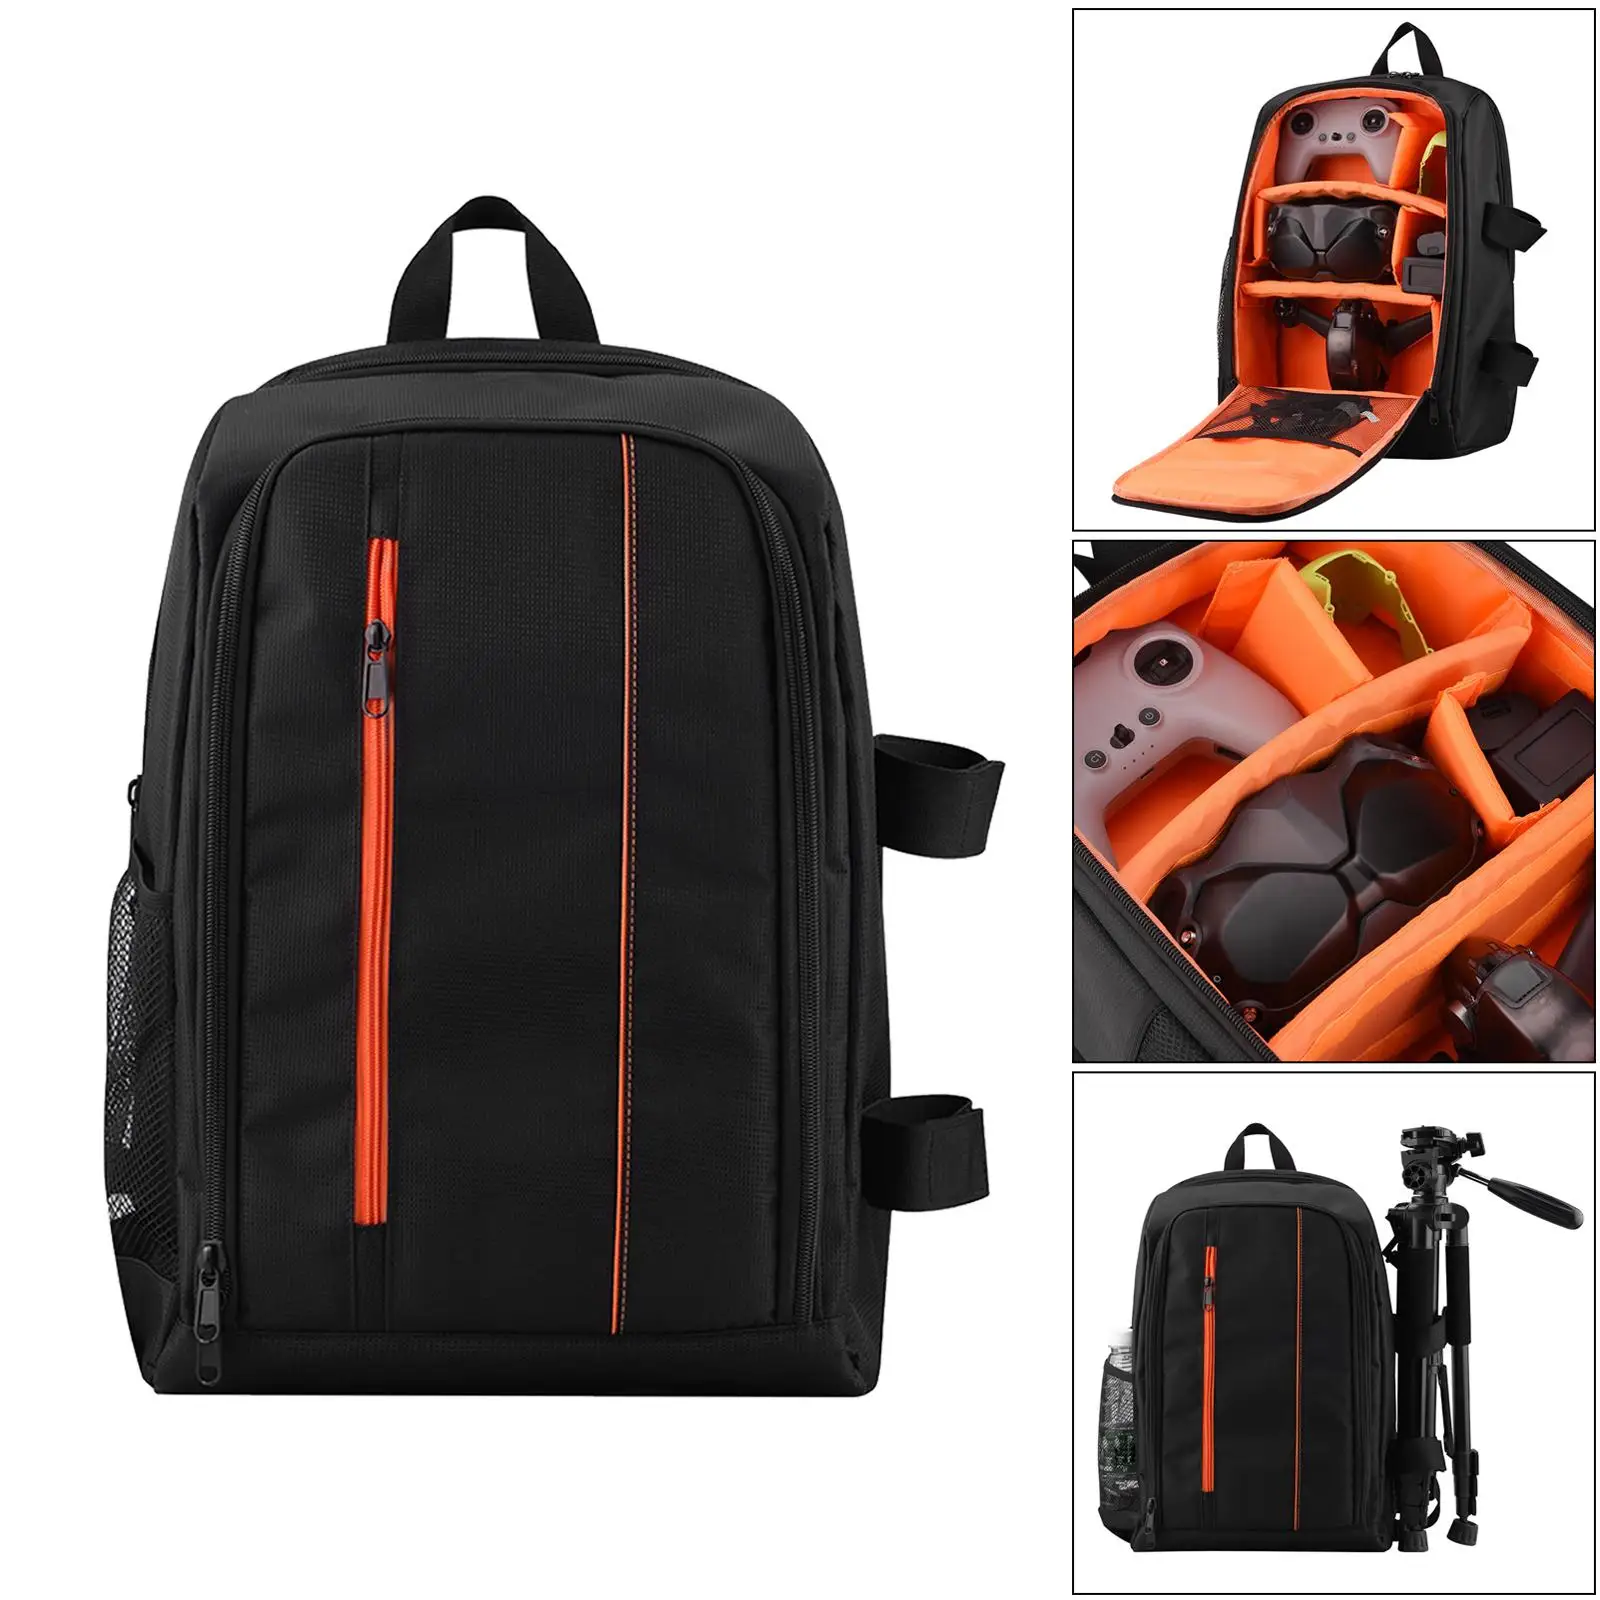 Carrying Case for Combo Accessories, Nylon Storage Bag for DJI Combo Accessories, Waterproof Storage Case Backpack